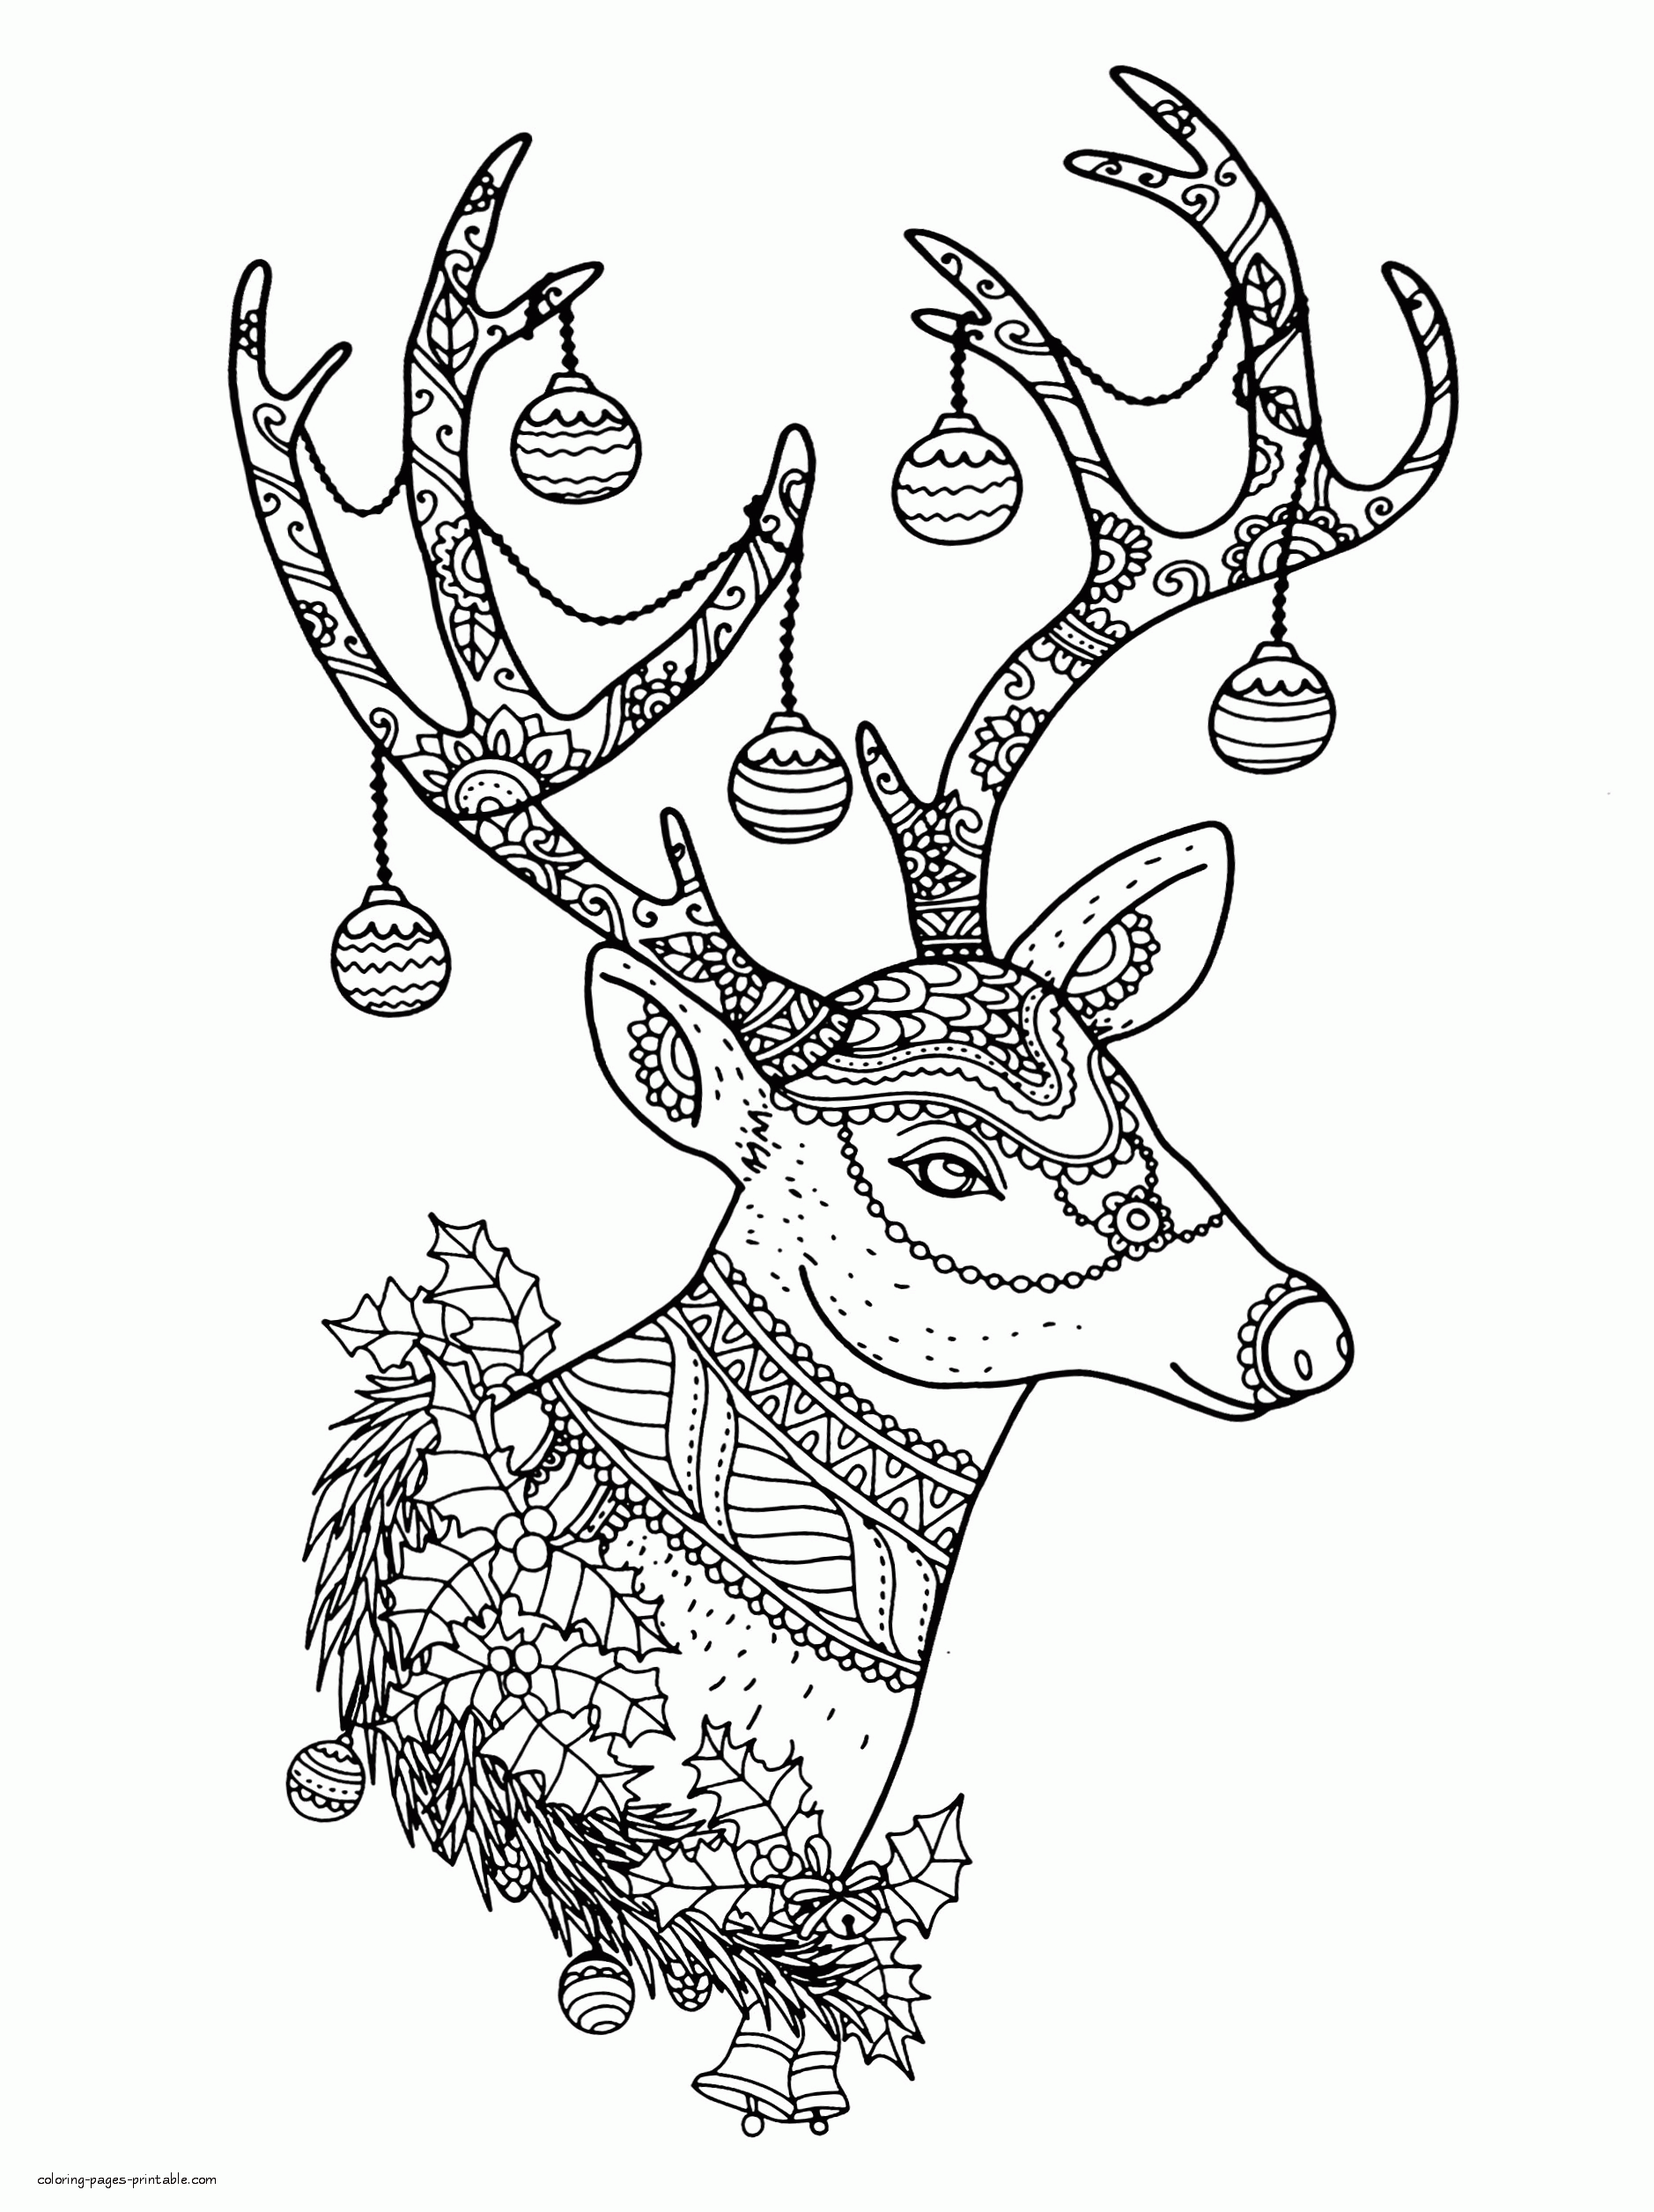 Free Christmas Reindeer Colouring Pages For Adults COLORING PAGES PRINTABLE COM